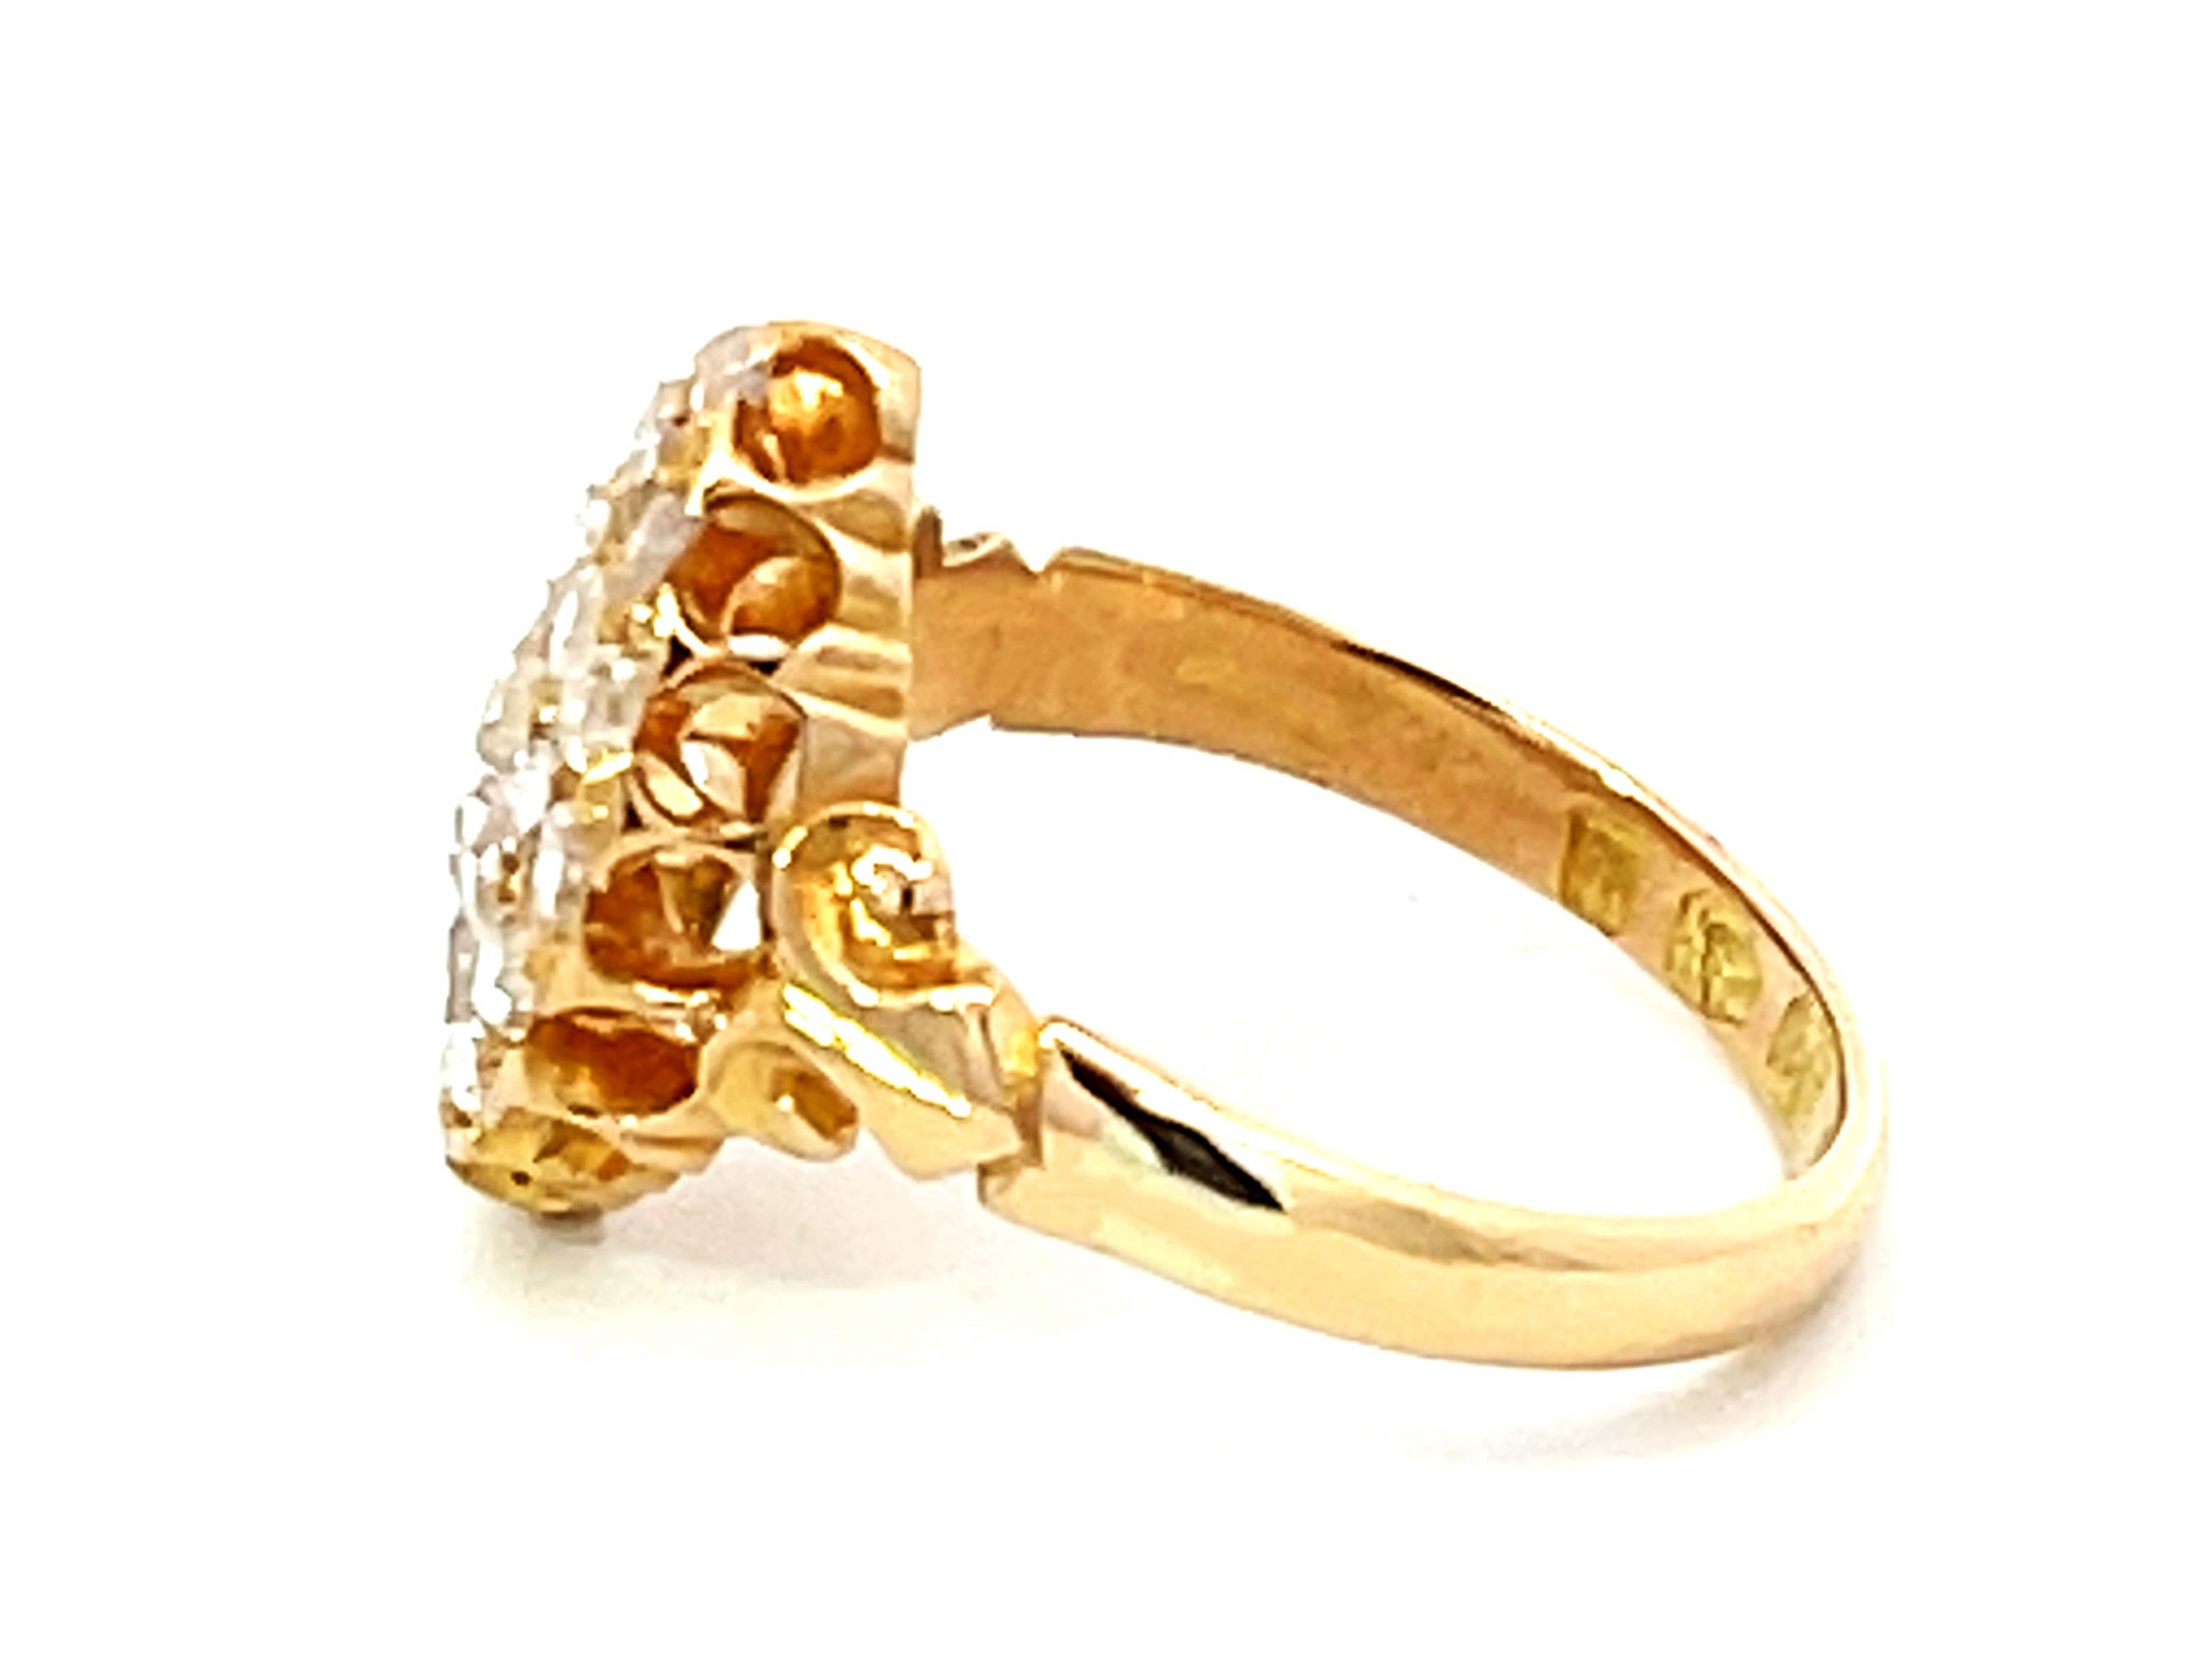 Antique European Rose Cut Diamond Ring in 18K Yellow Gold For Sale 1